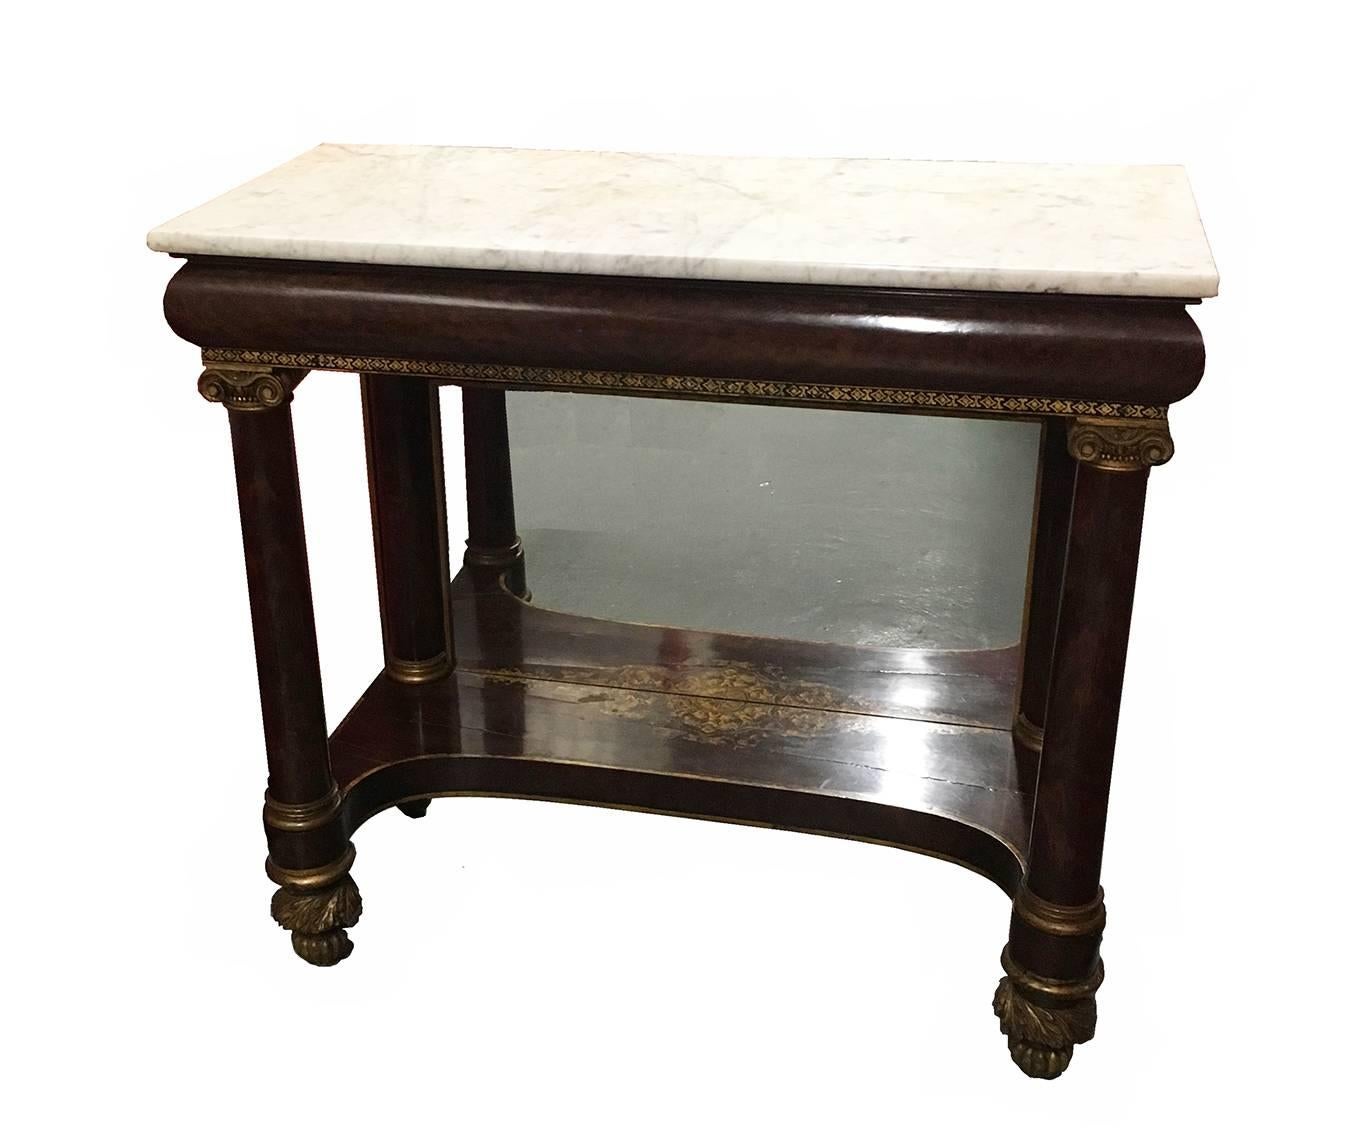 New York Classical pier table with marble top, water-gilt stenciled scroll decoration to the mahogany ground, with white pine and poplar secondary woods, the rectangular frame with four columns topped by carved scrolls, with carved ankles and melon